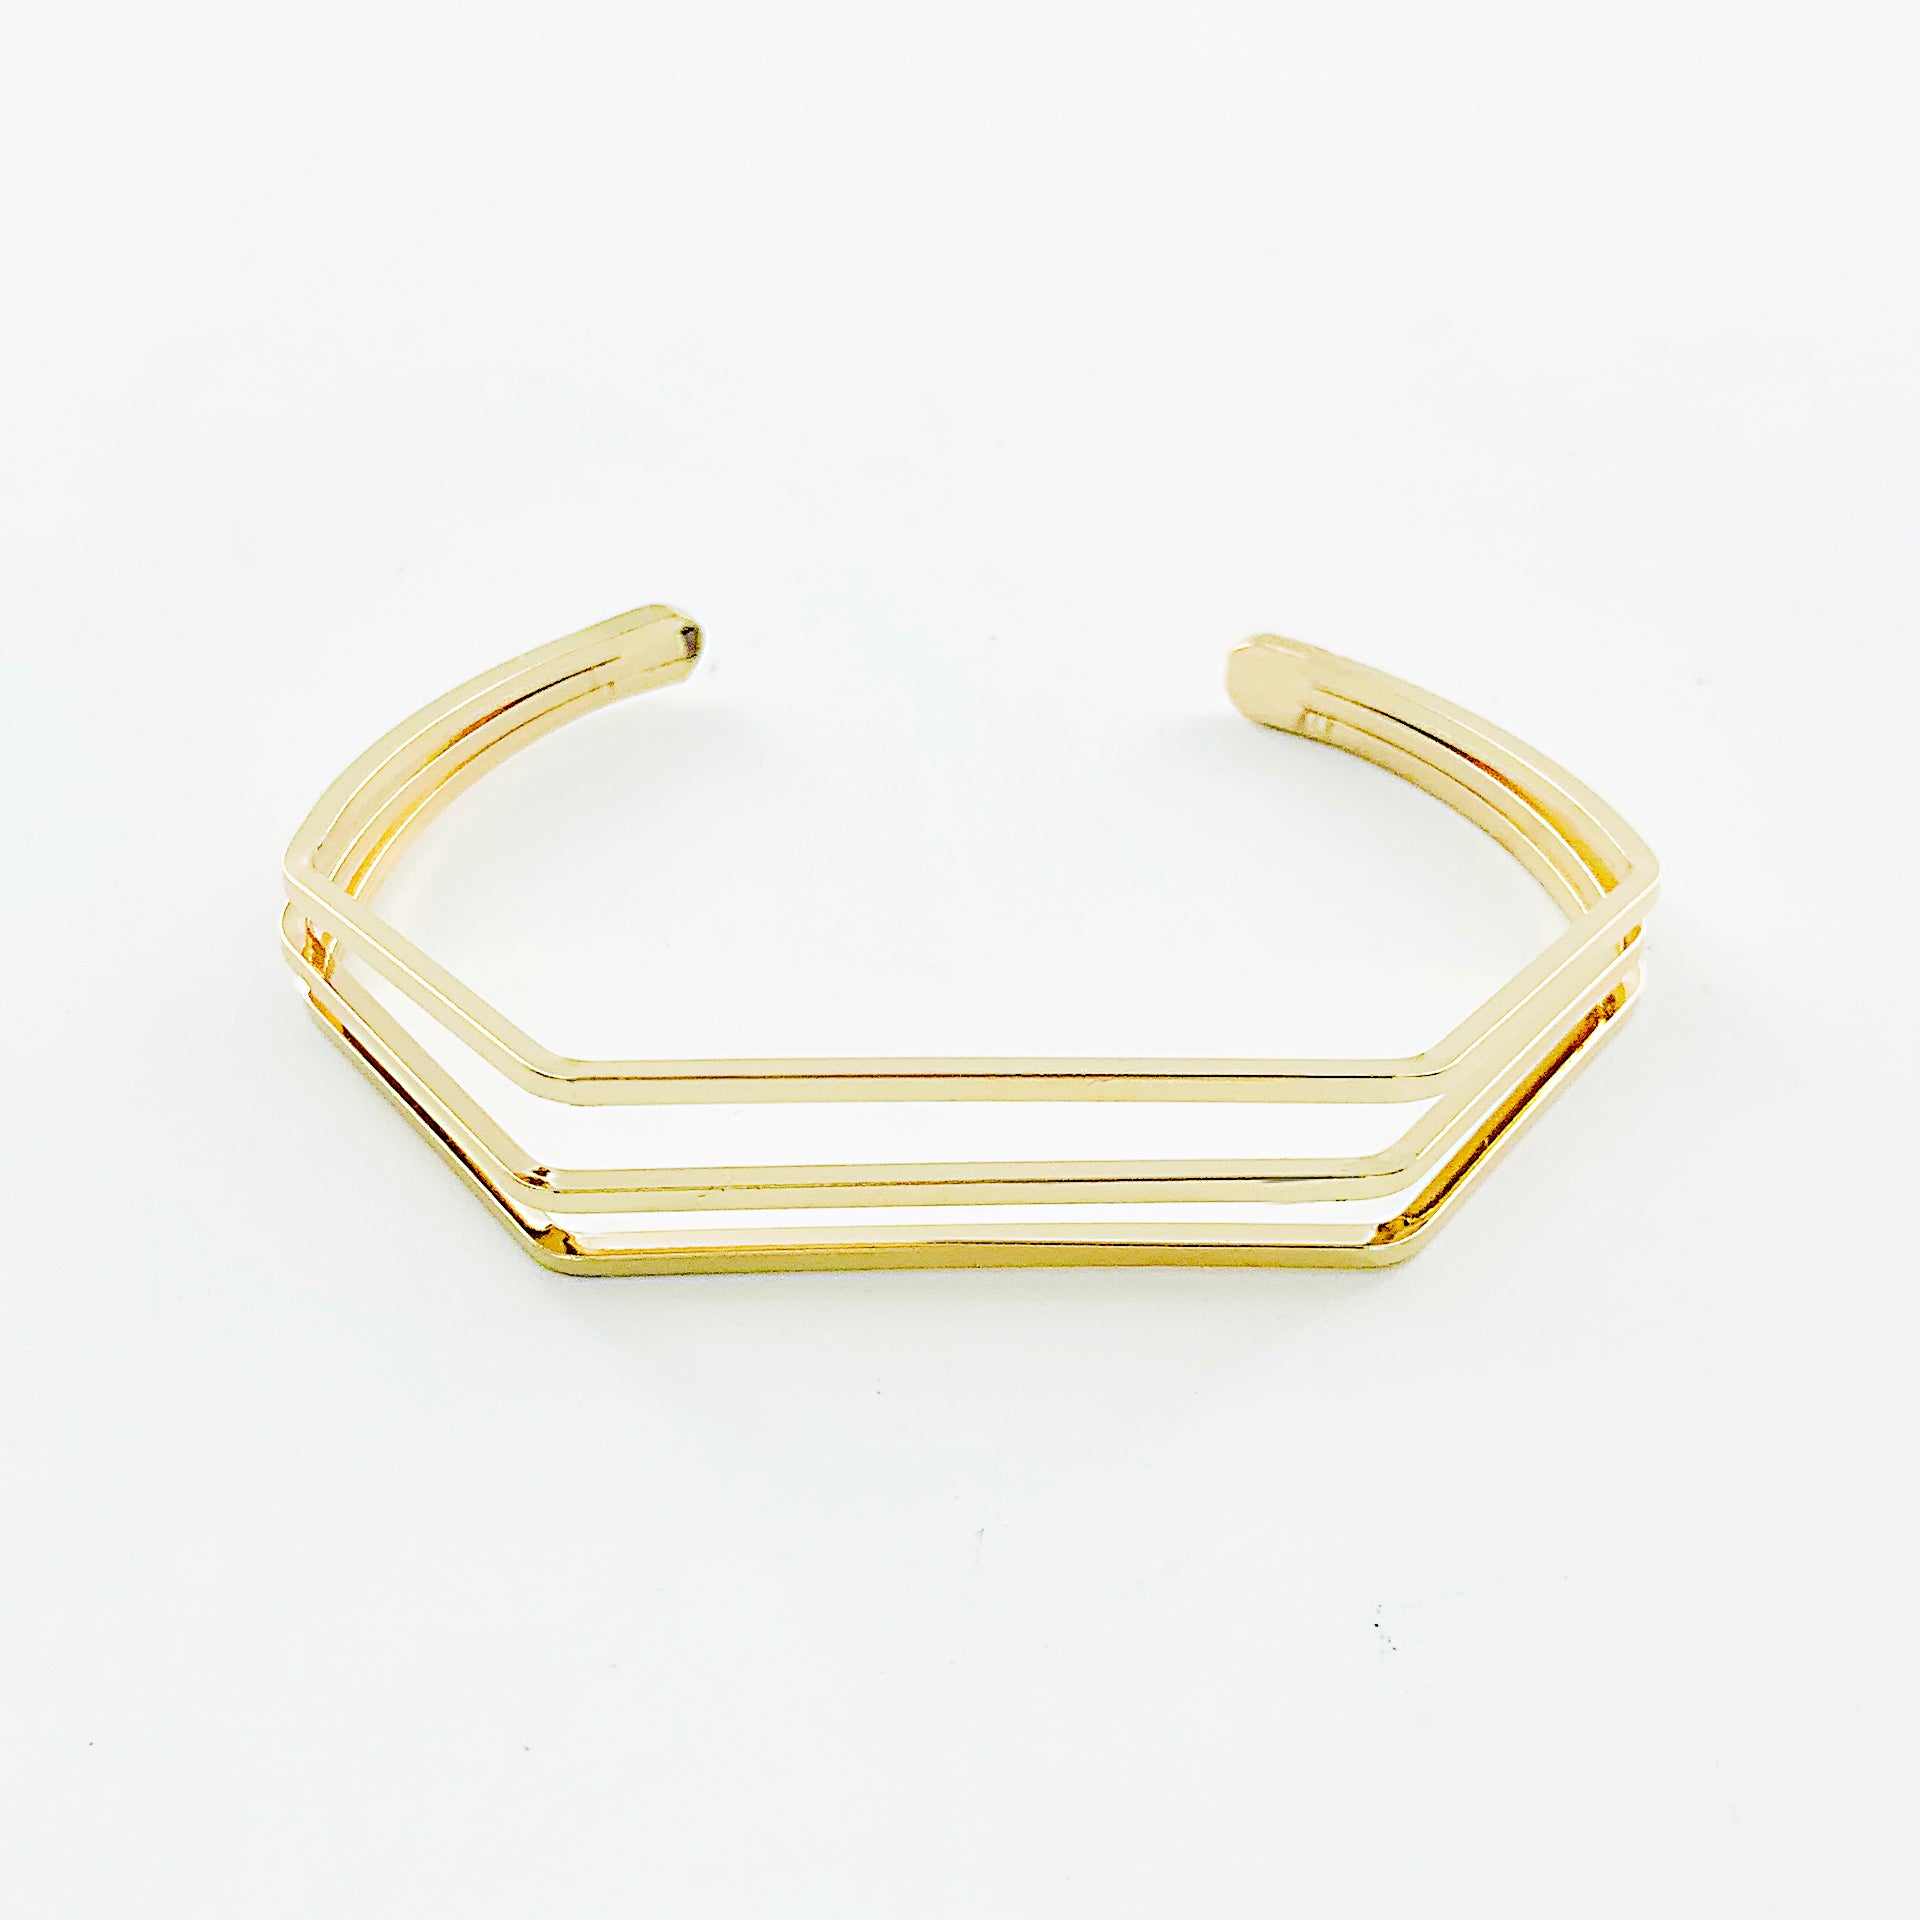 Thin gold bangles with geometric line design